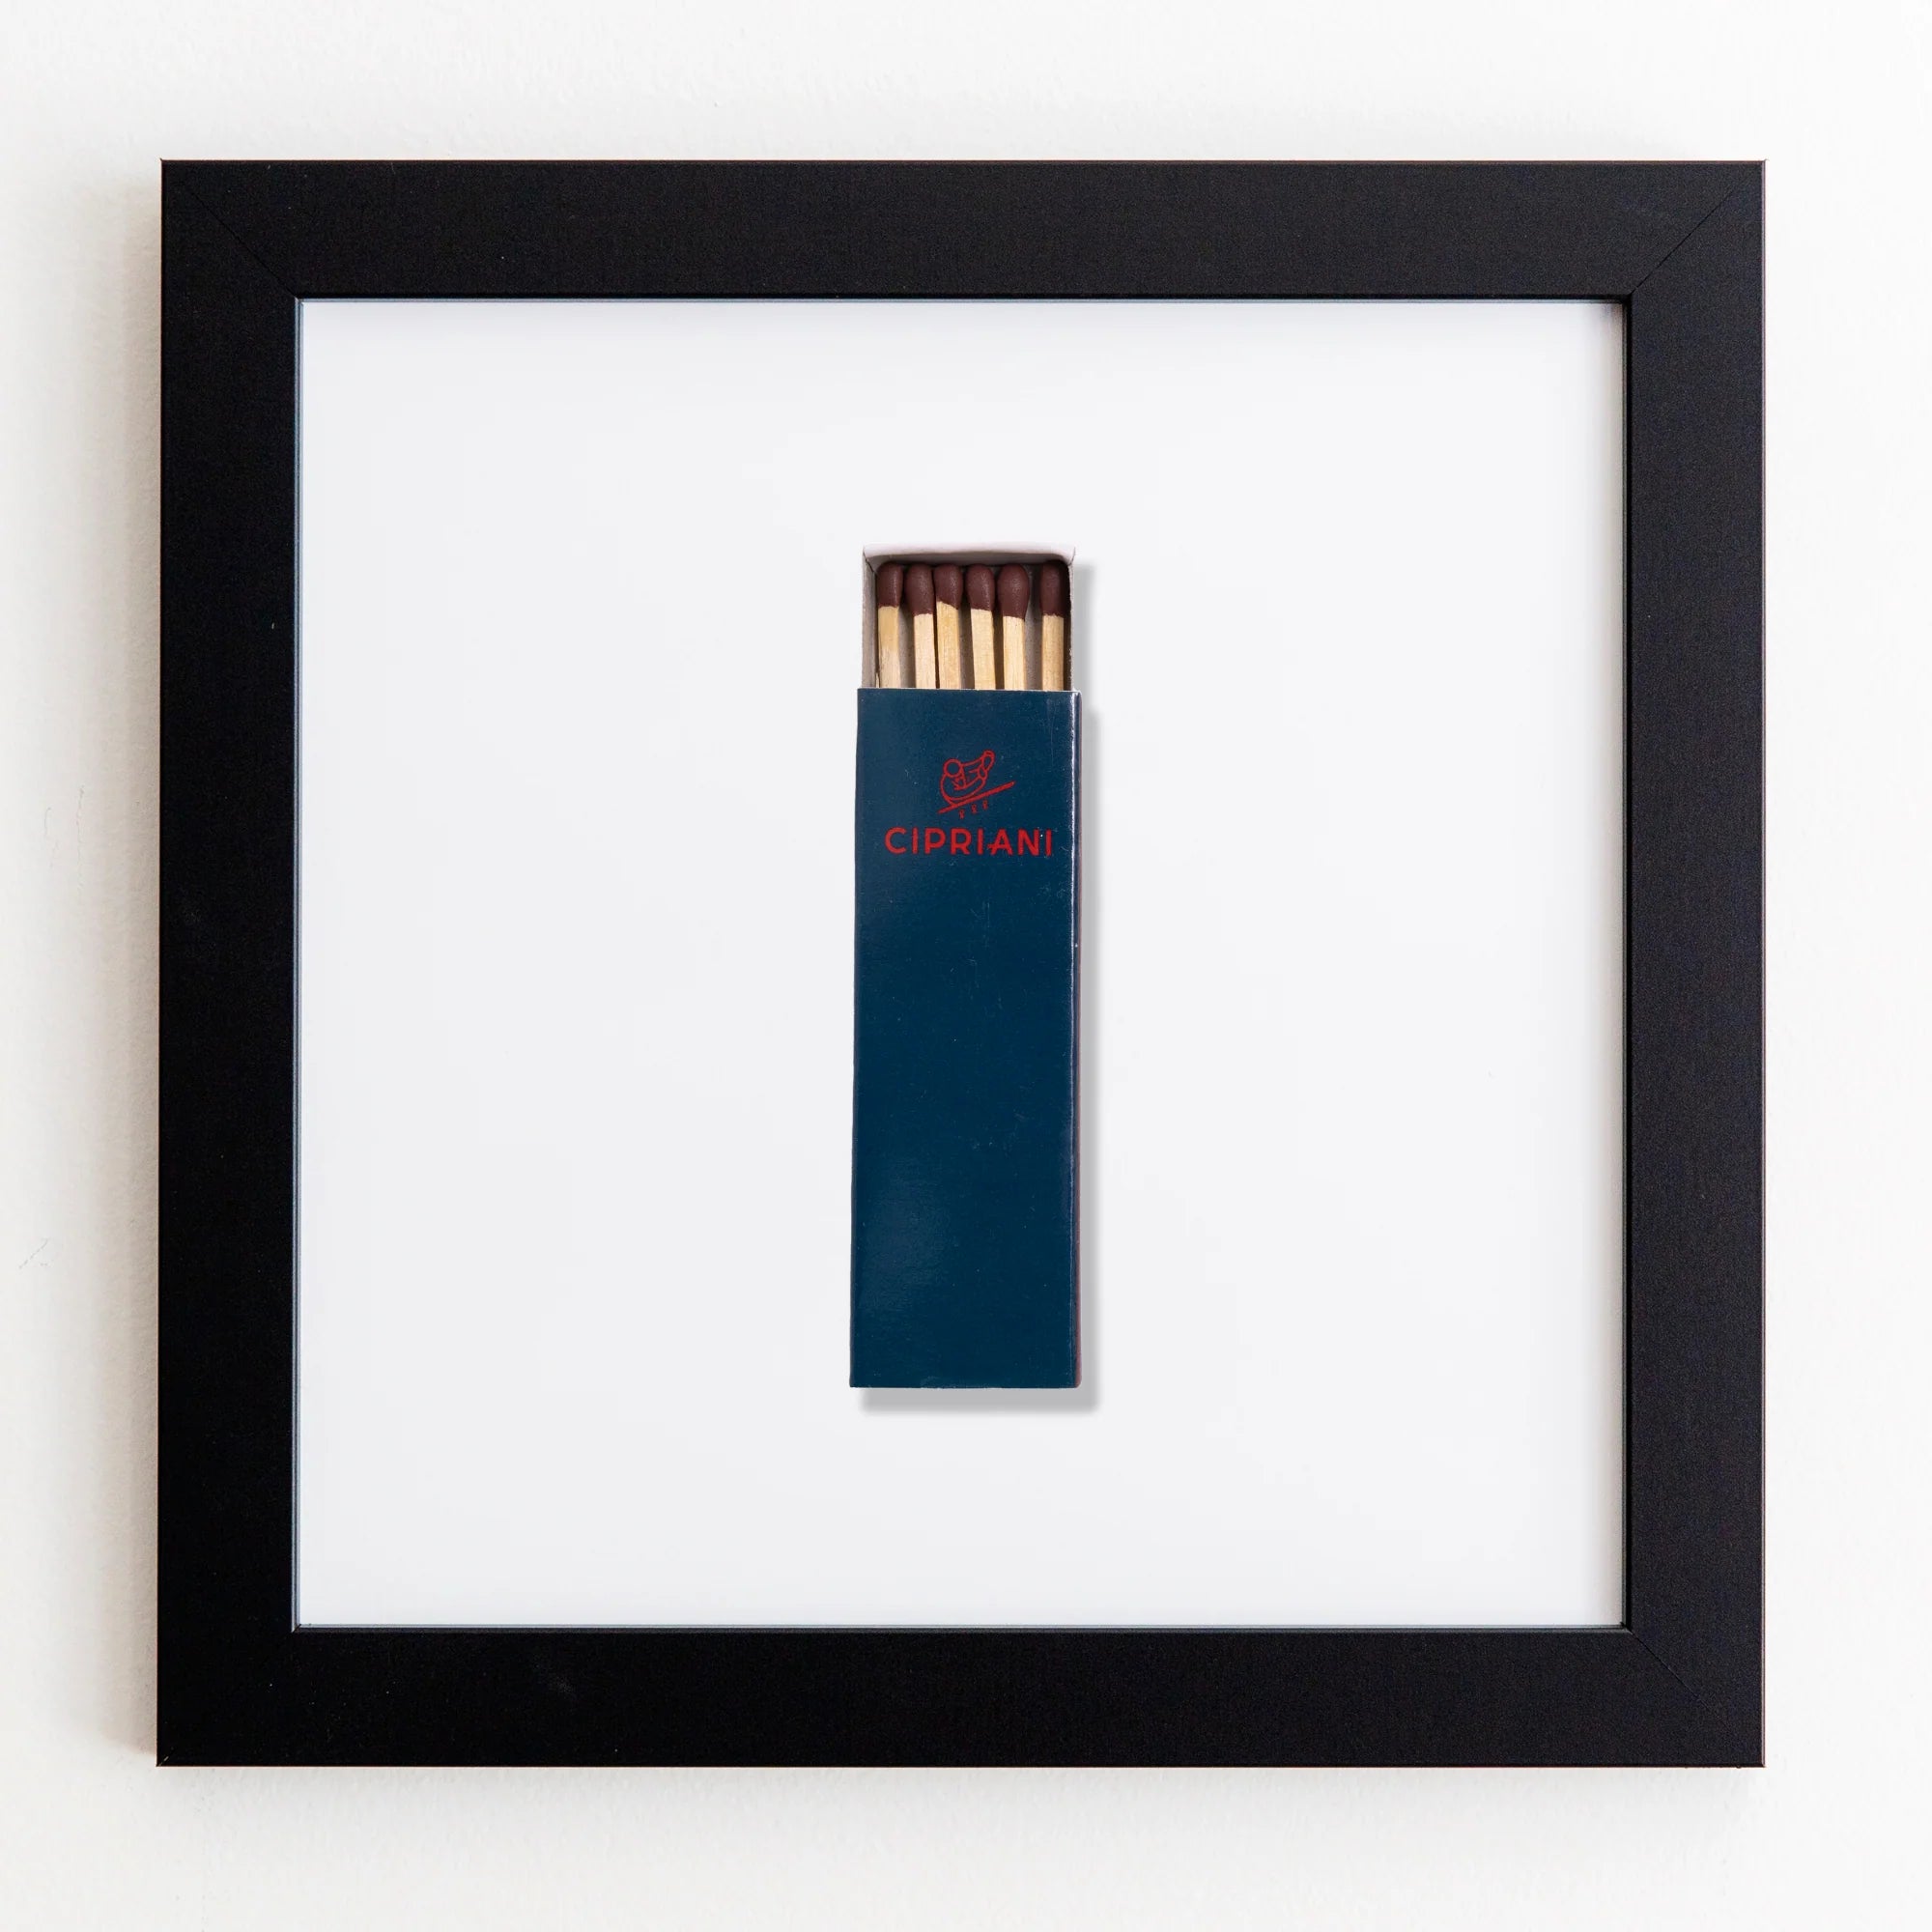 A framed artwork featuring a matchbox labeled &quot;Cipriani&quot; containing several matches, centered on a white acrylic background within a Art Square Black Frame from Match South.